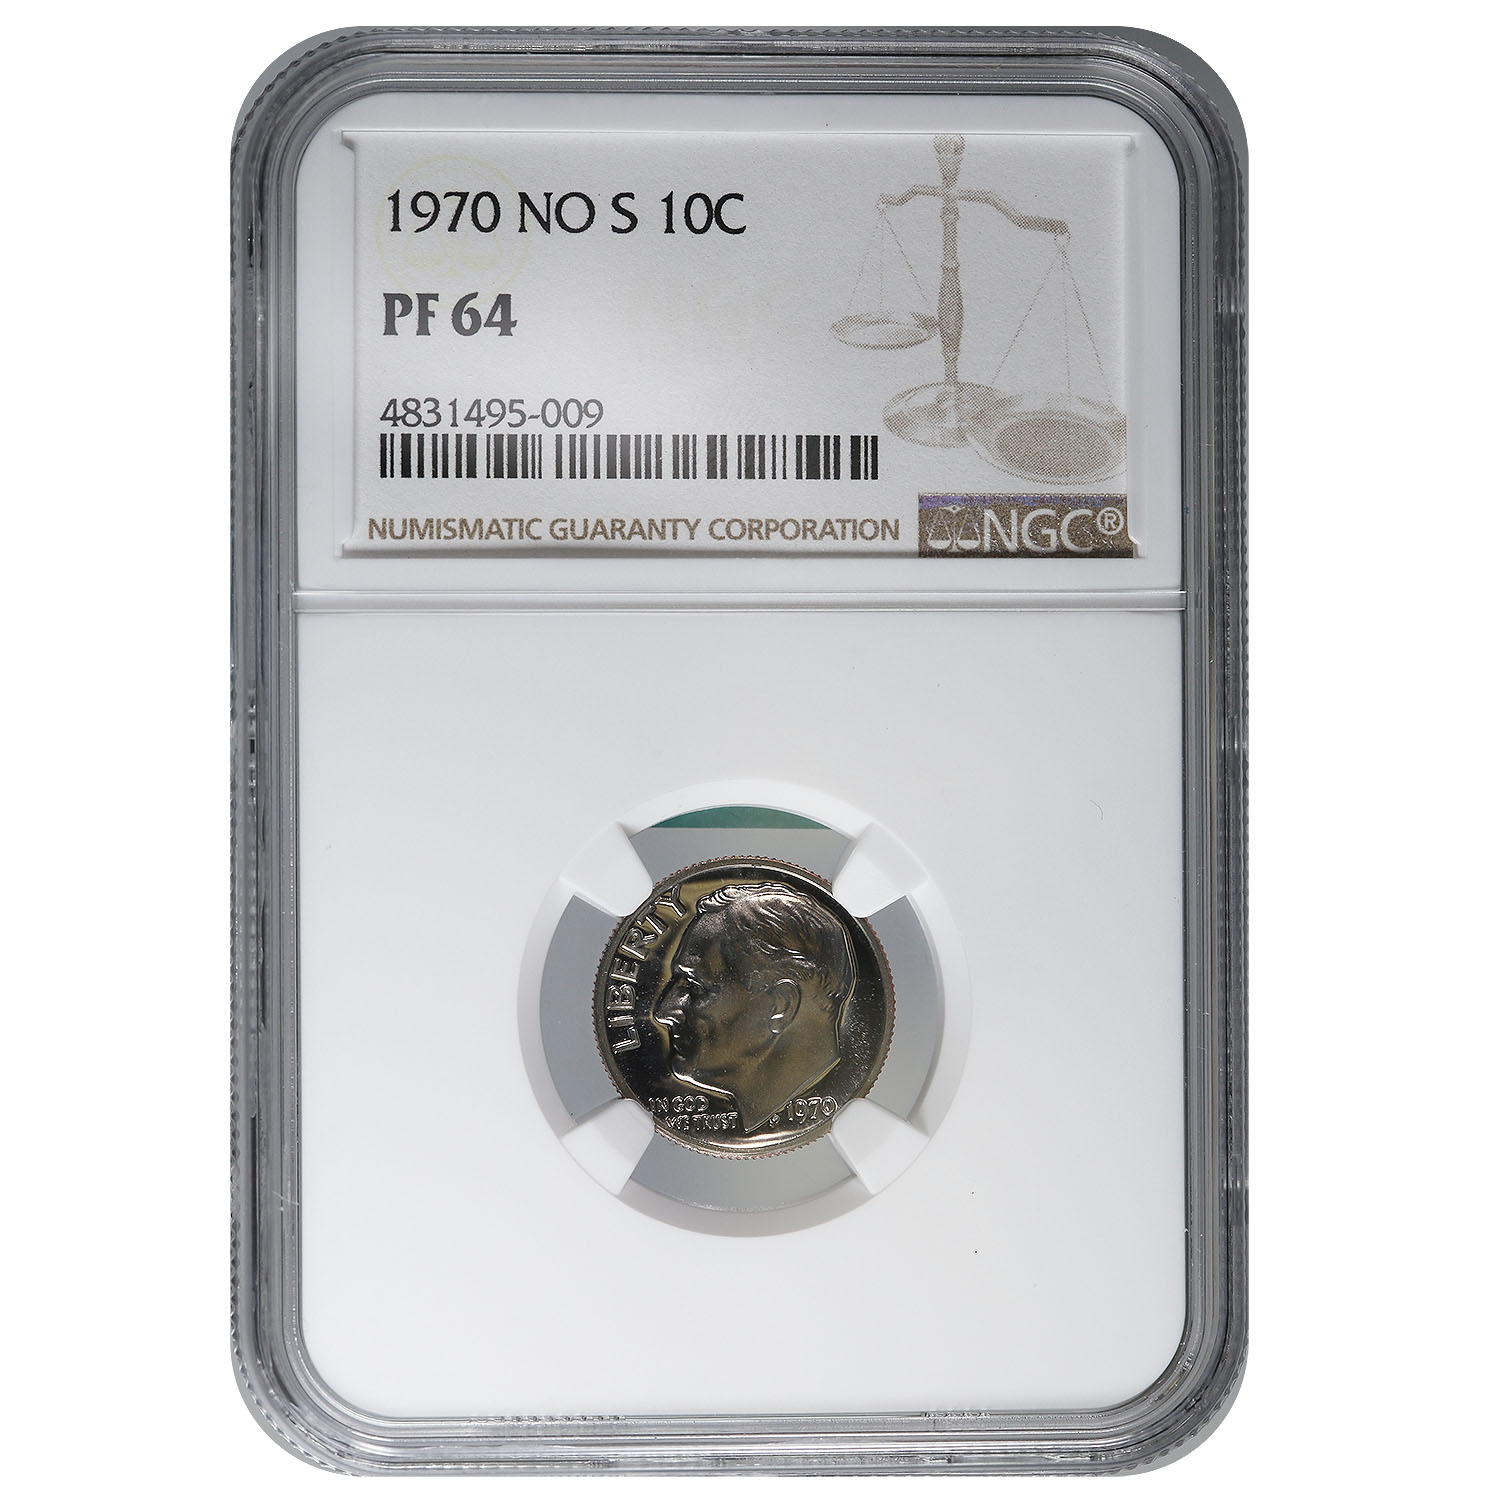 Certified Roosevelt Dime 1970 No S PF64 NGC